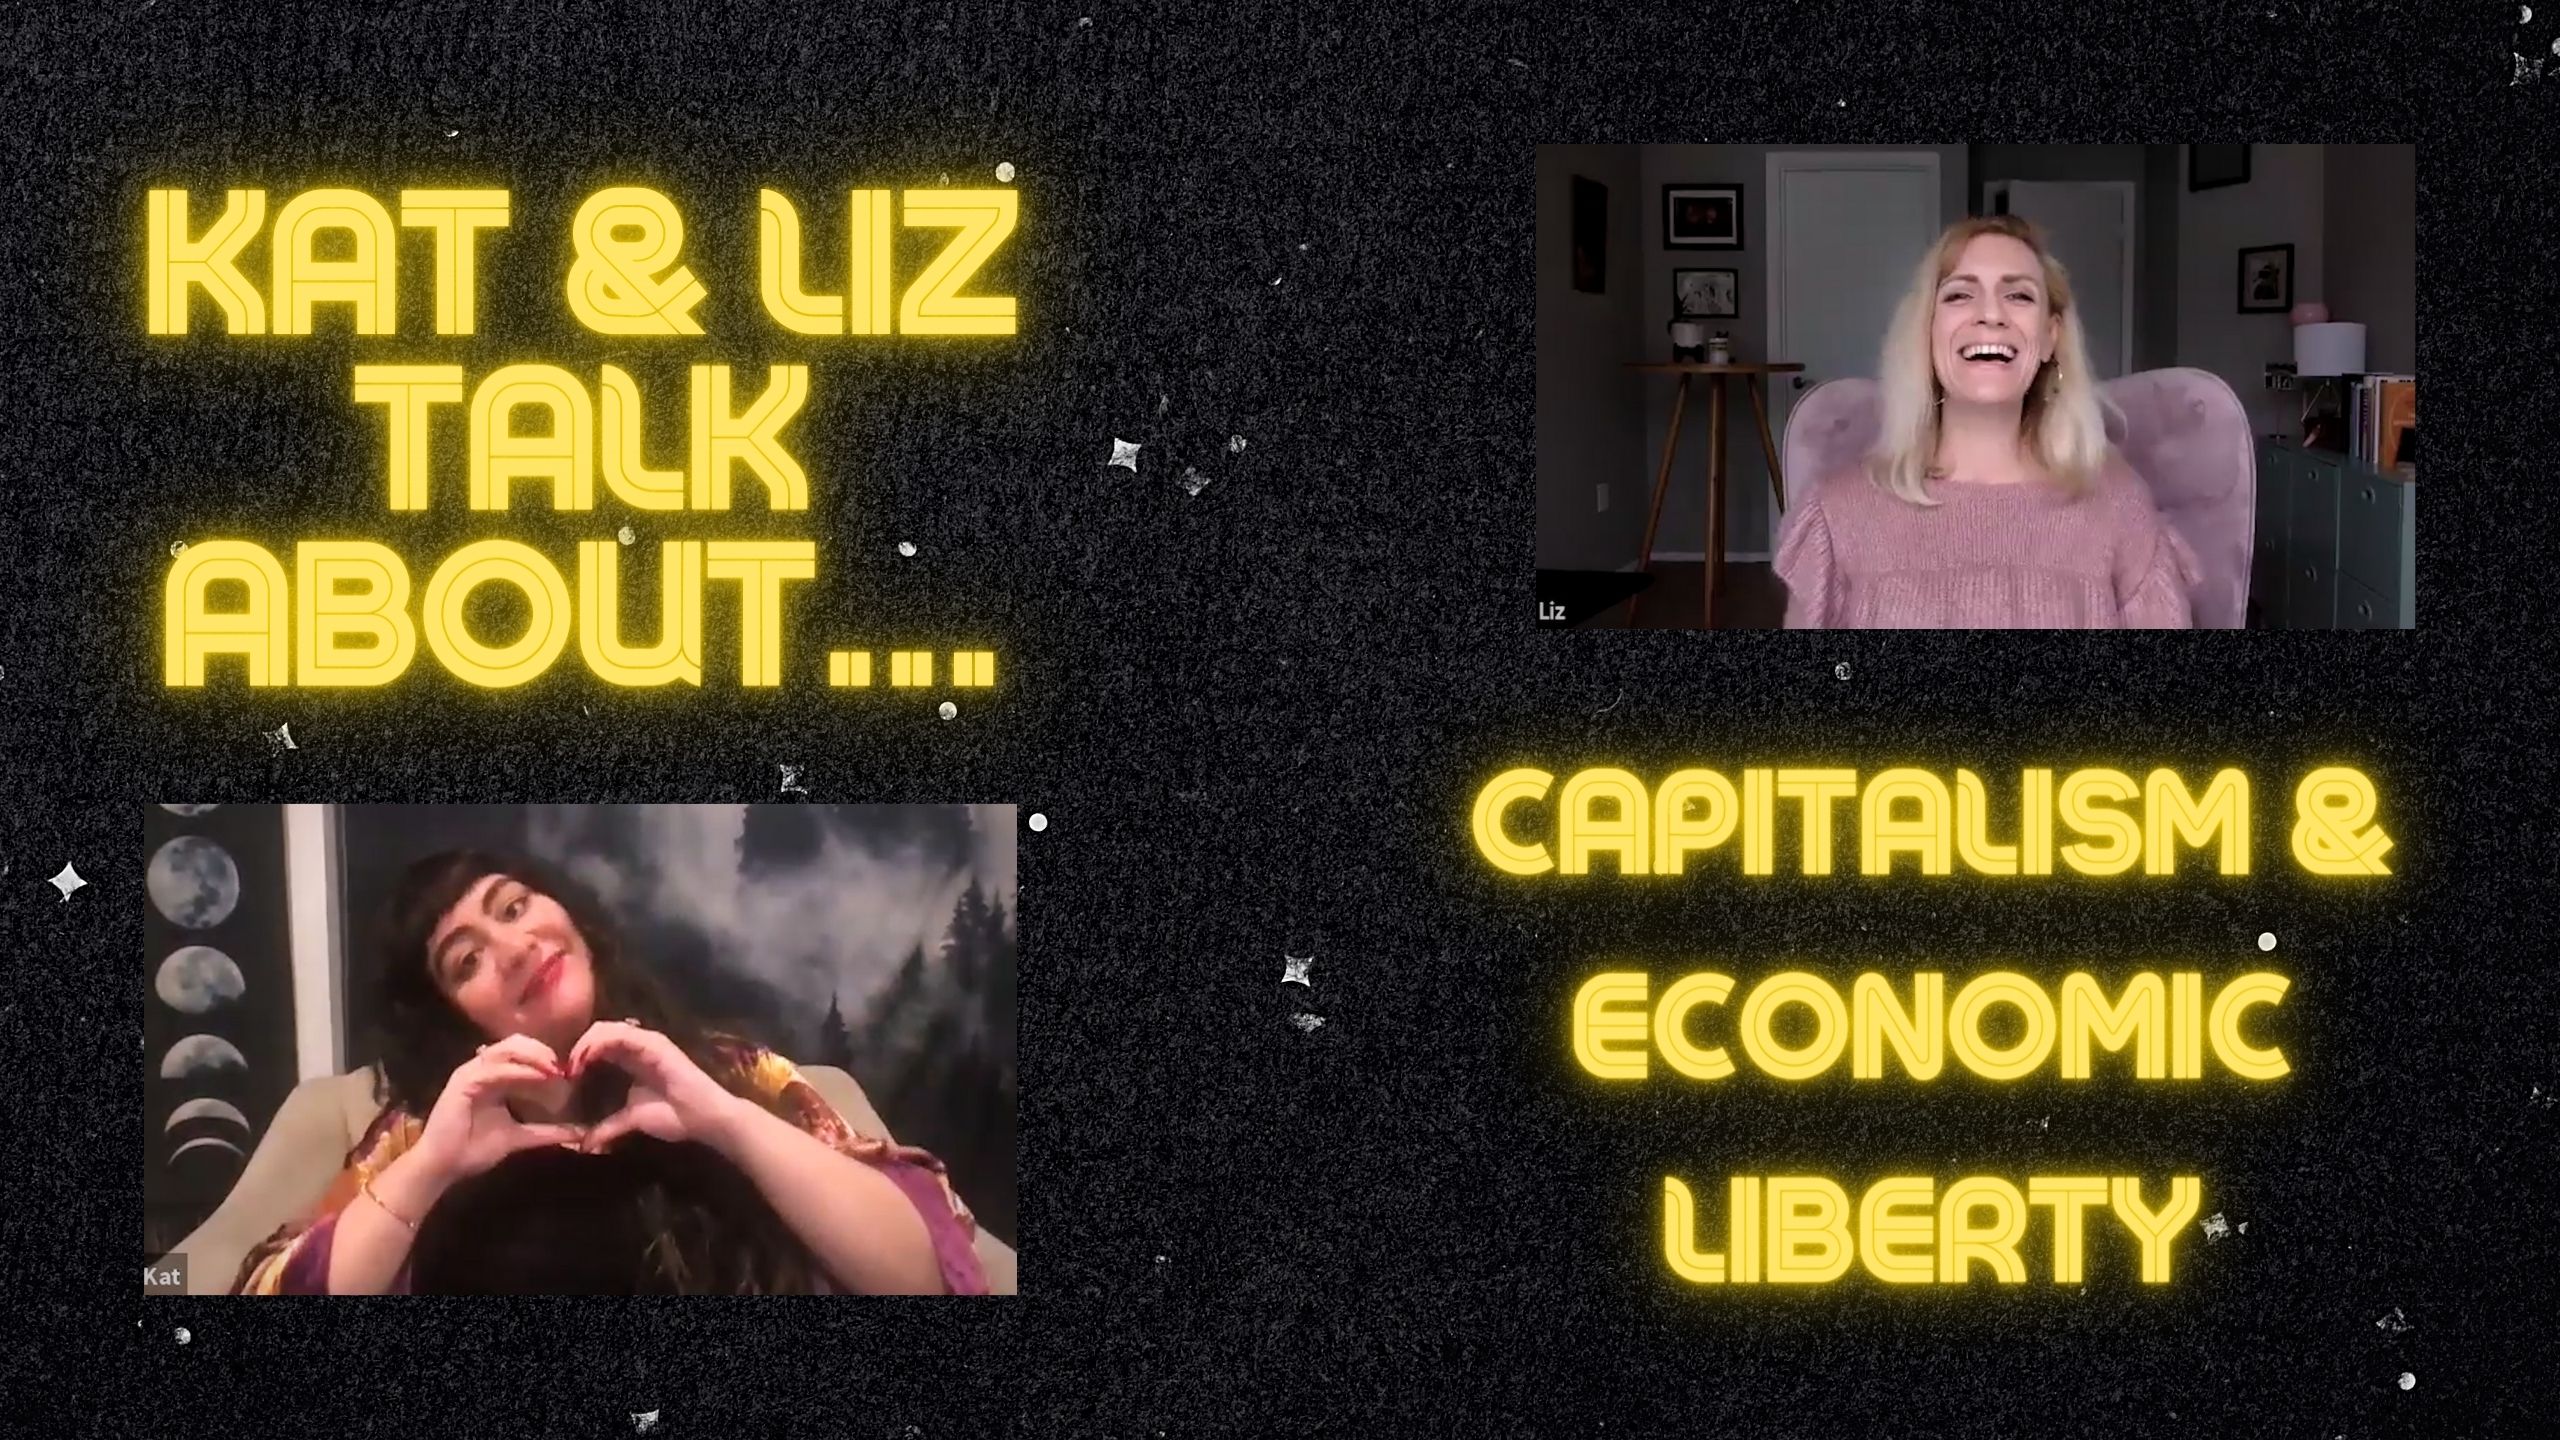 Words: Kat & Liz Talk About... Capitalism & Economic Liberty with pictures of Kat and Liz